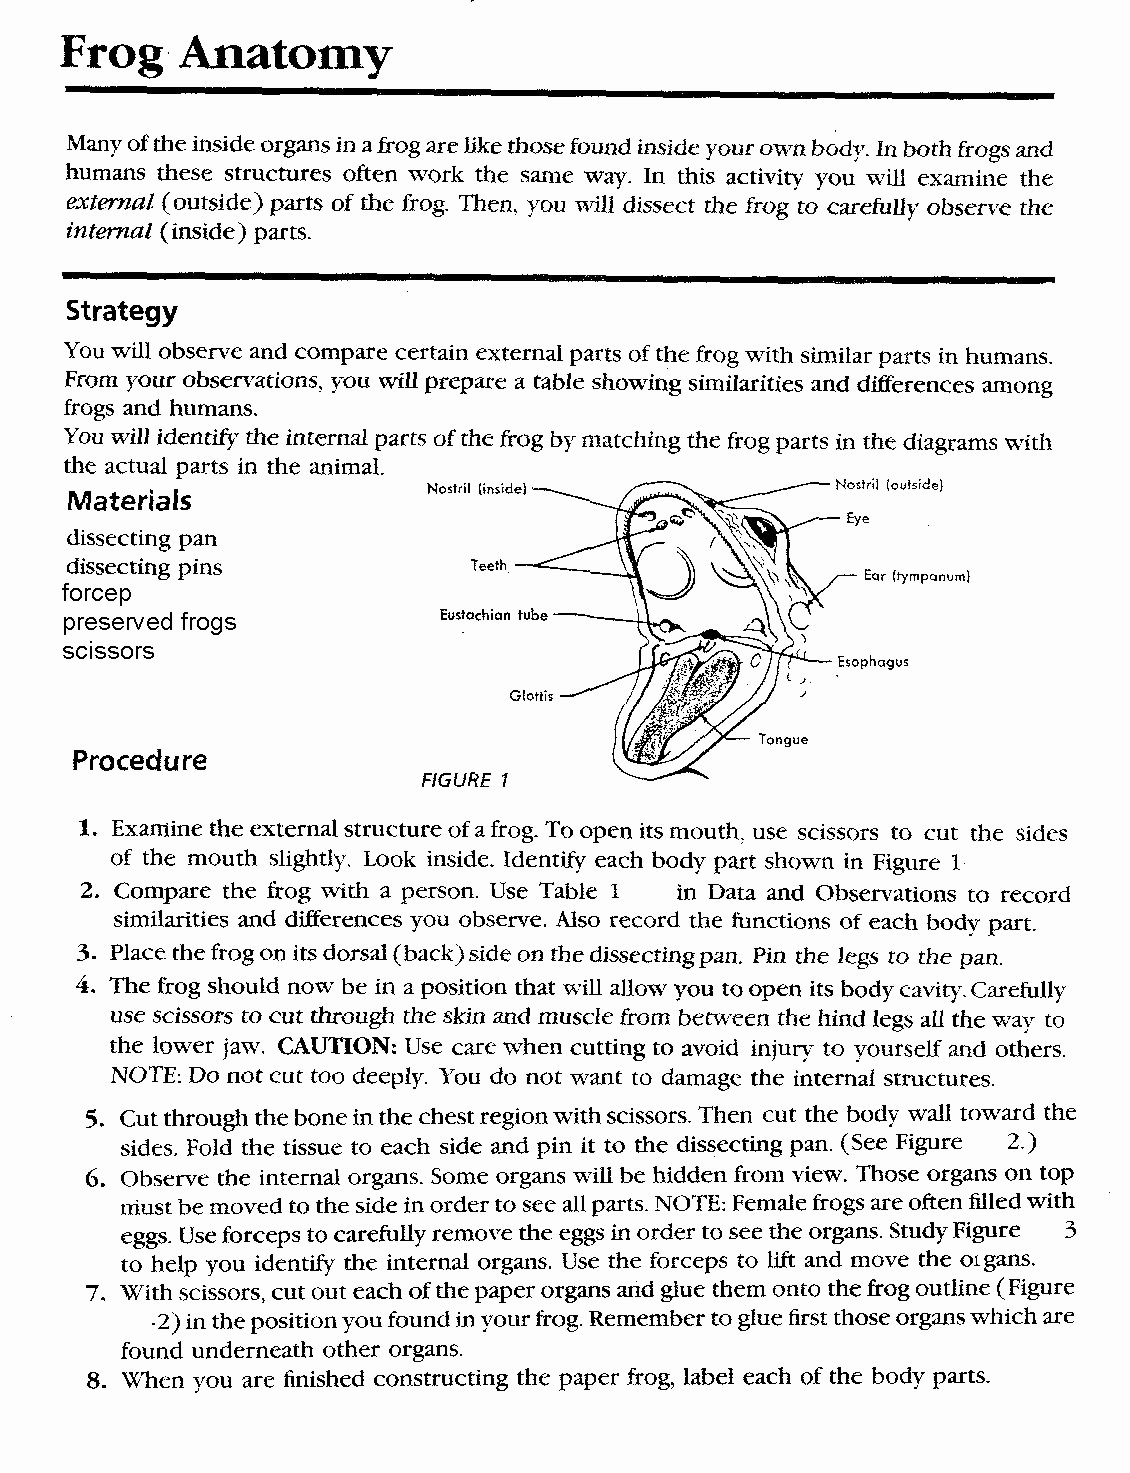 Frog Dissection Worksheet Answer Key Unique Classification Worksheet Answer Key Biology Corner